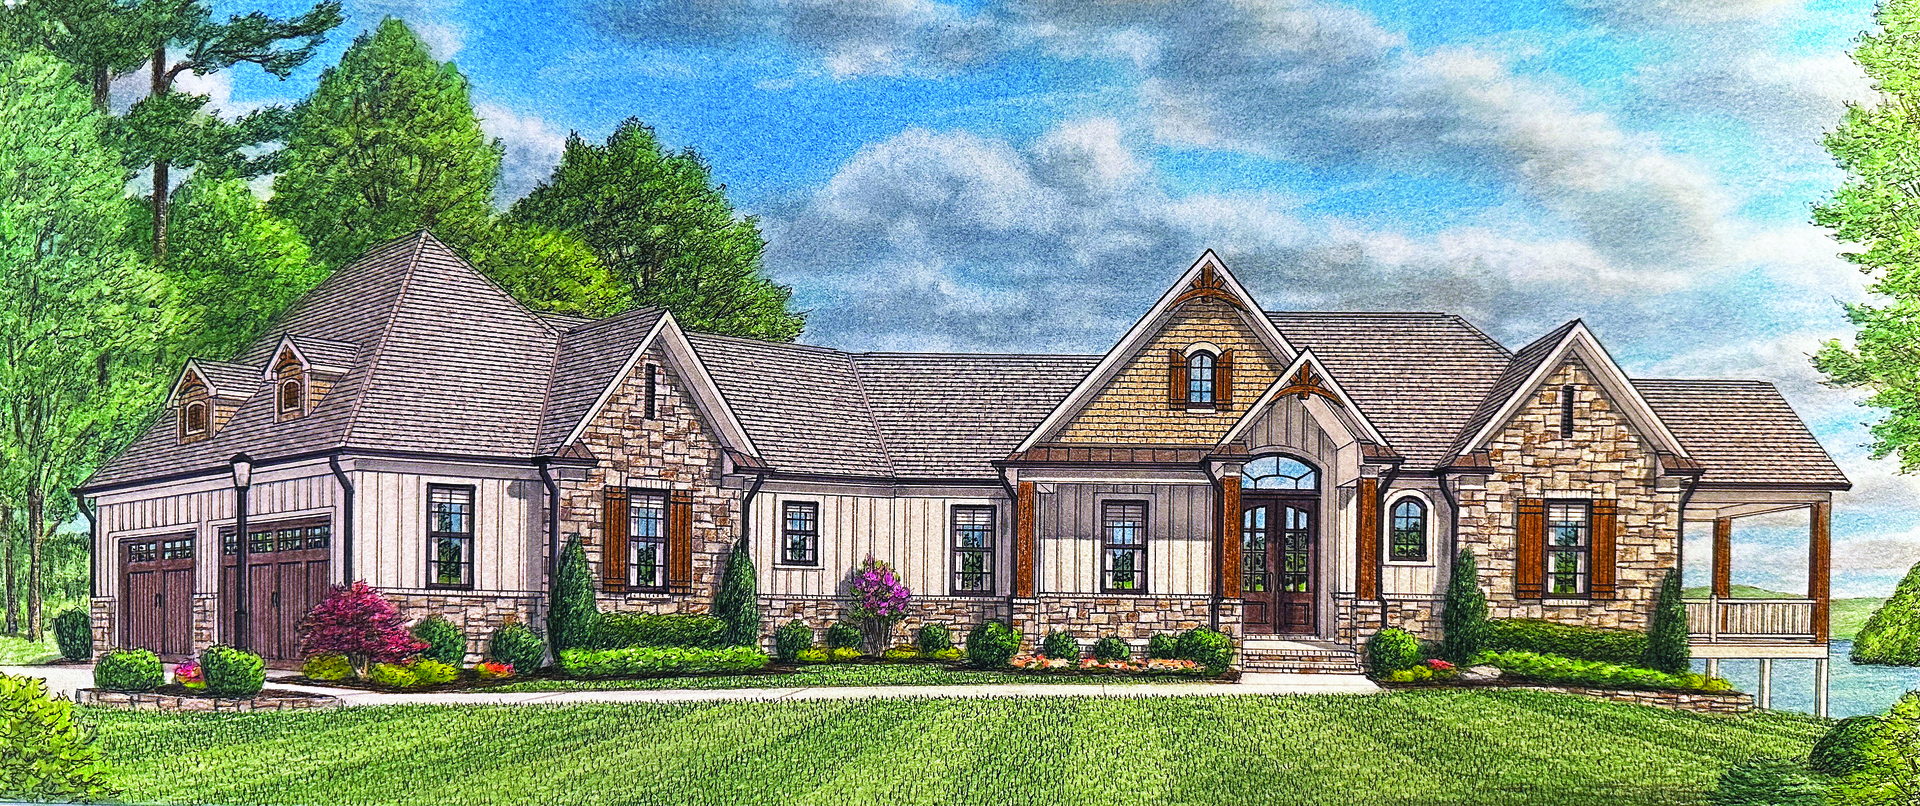 The Serenity Front Elevation Rendering